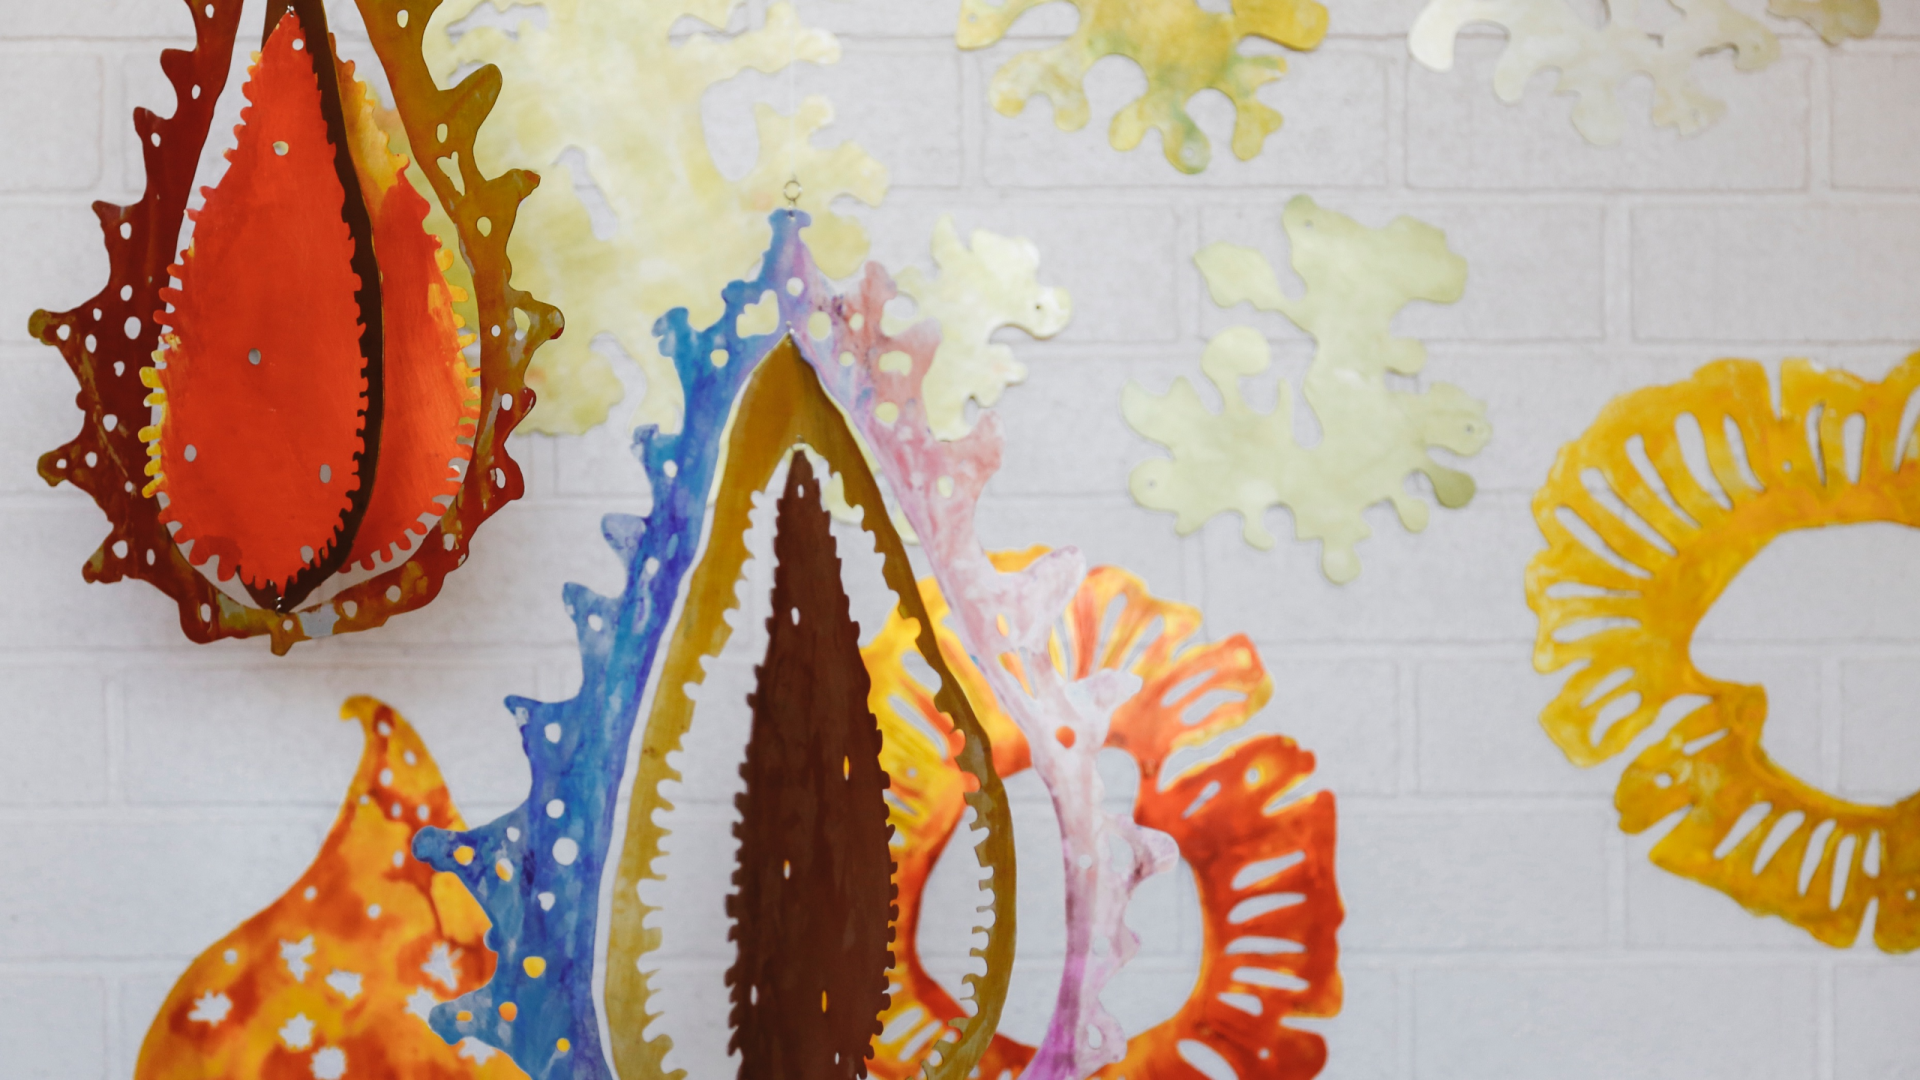  Colourful metal wall sculptures, images of seeds and lichen and nature forms.